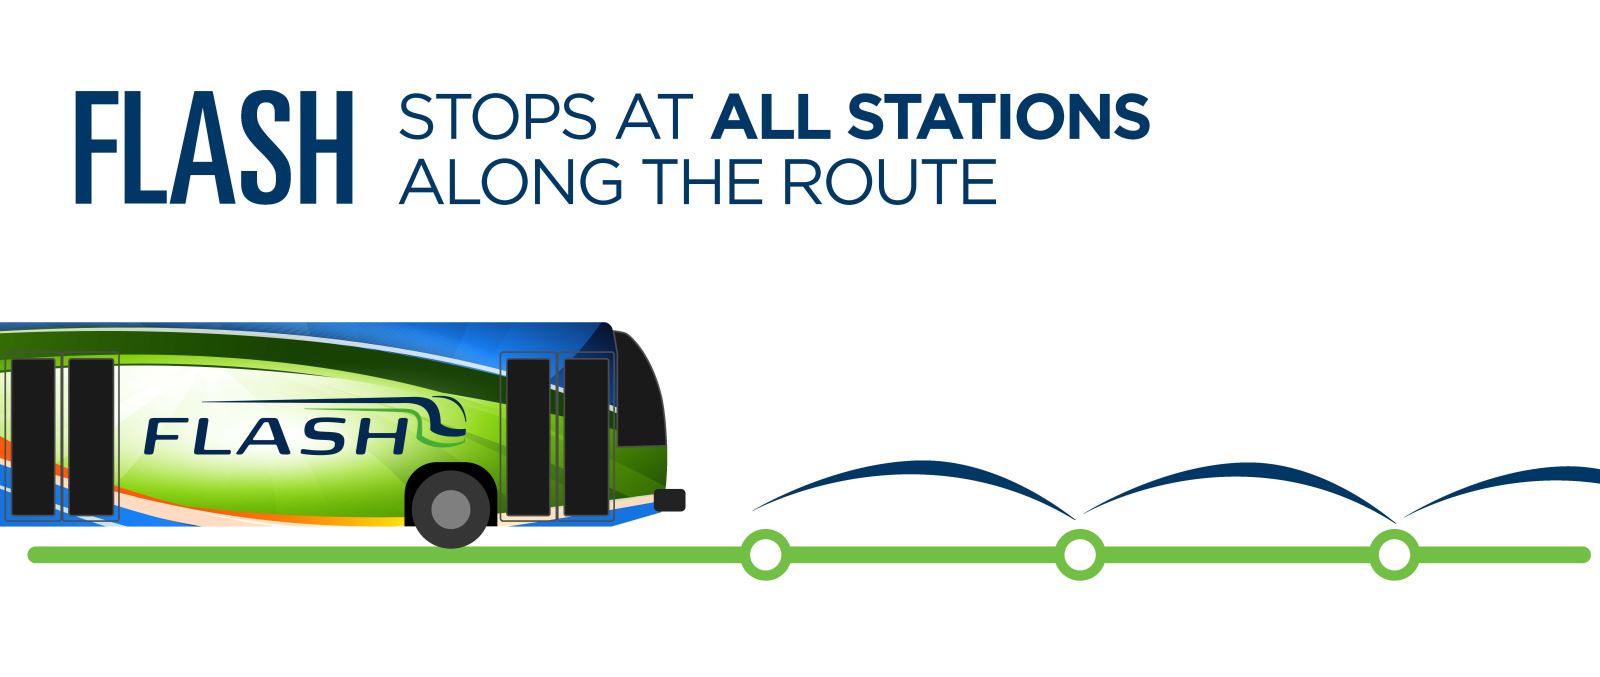 Flash stops at all stations along the route.